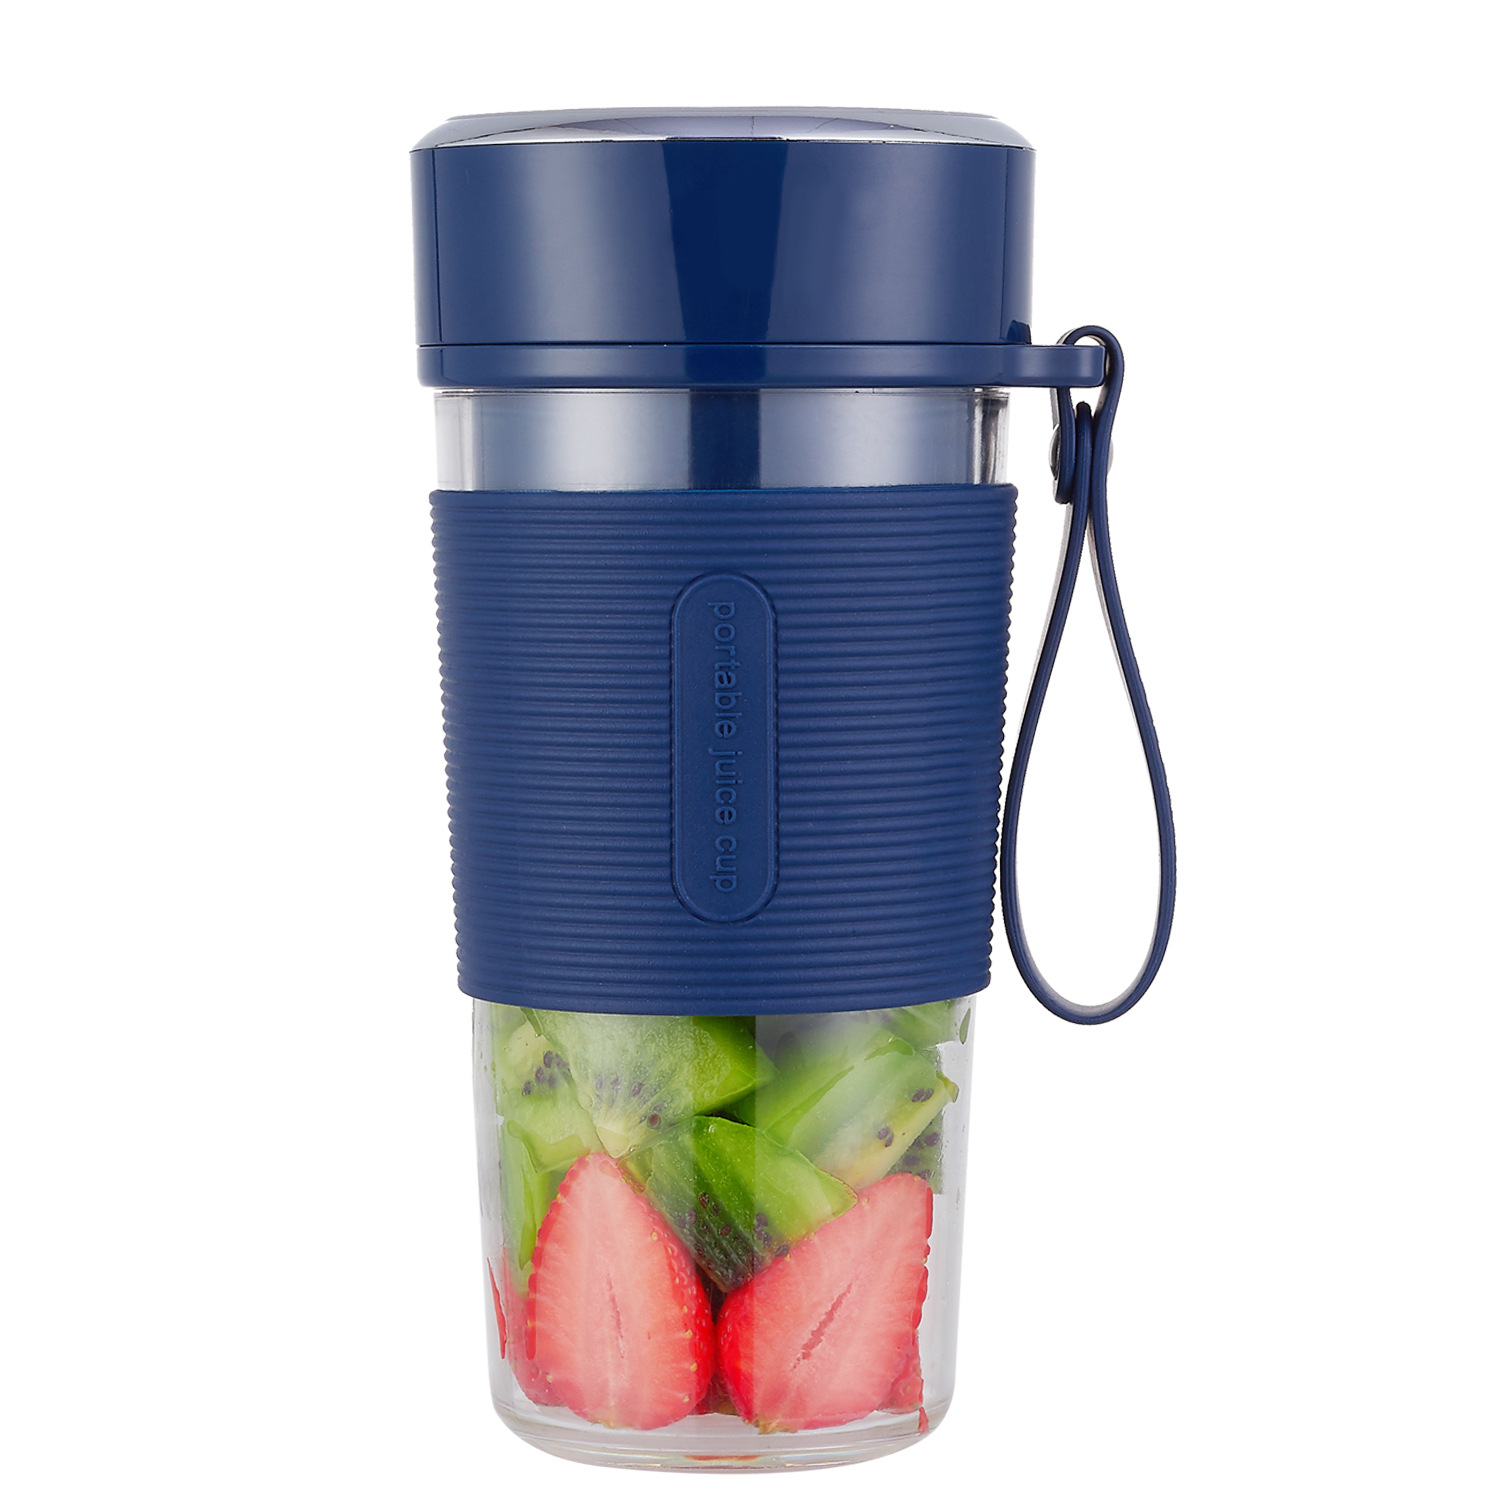 Portable juicer wireless usb charging juicer cup